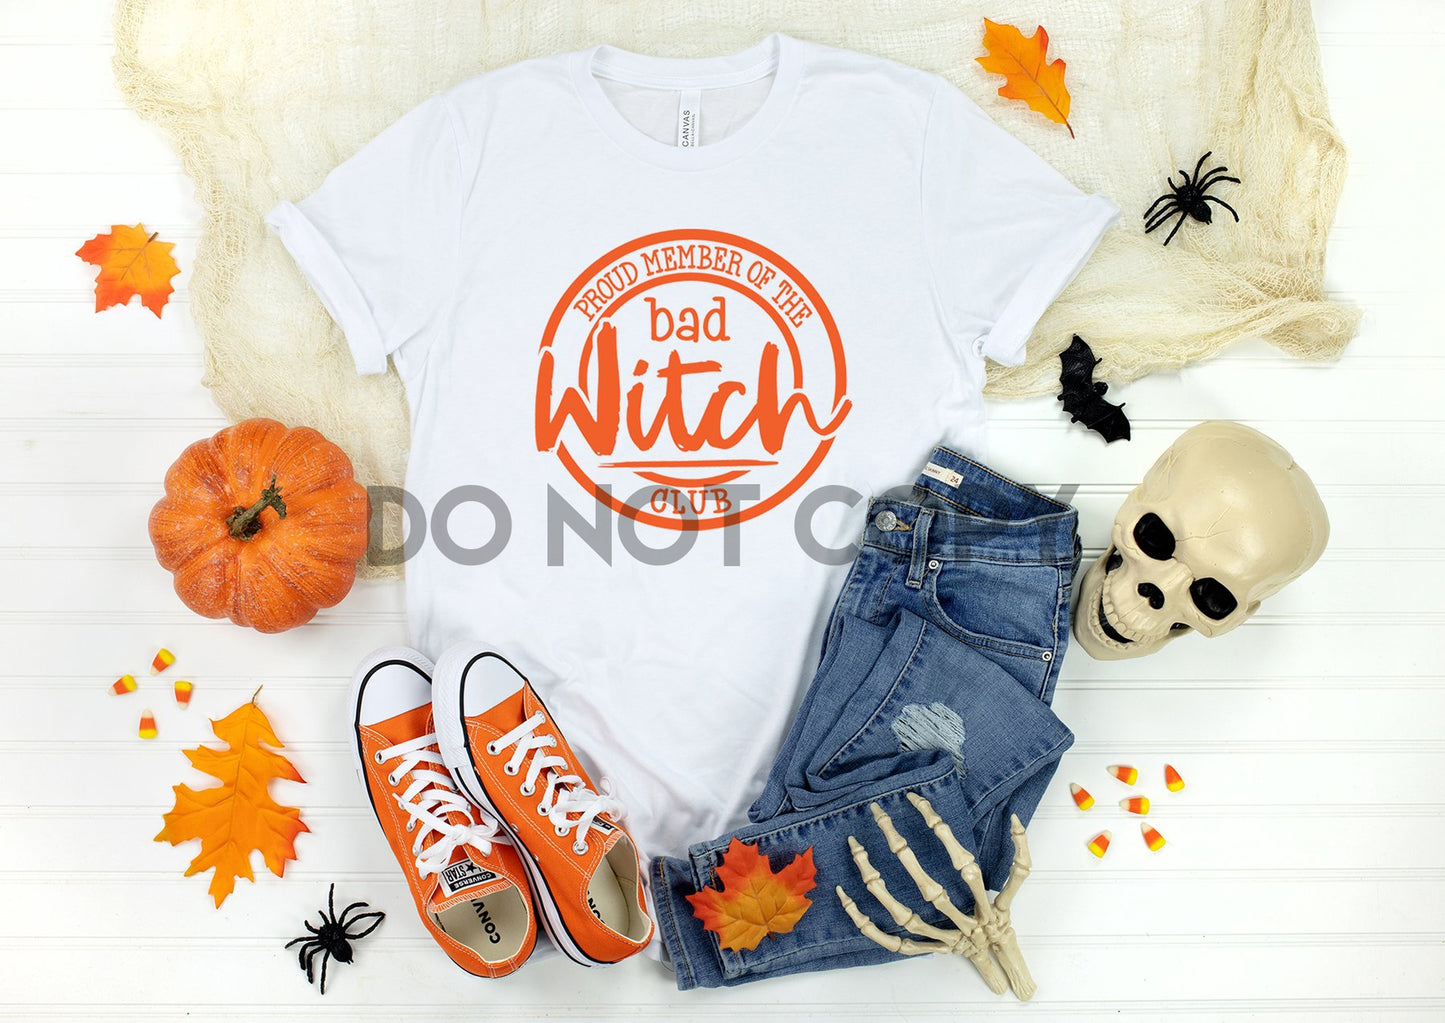 Proud Member of the Bad Witch Club Orange Sublimation Print